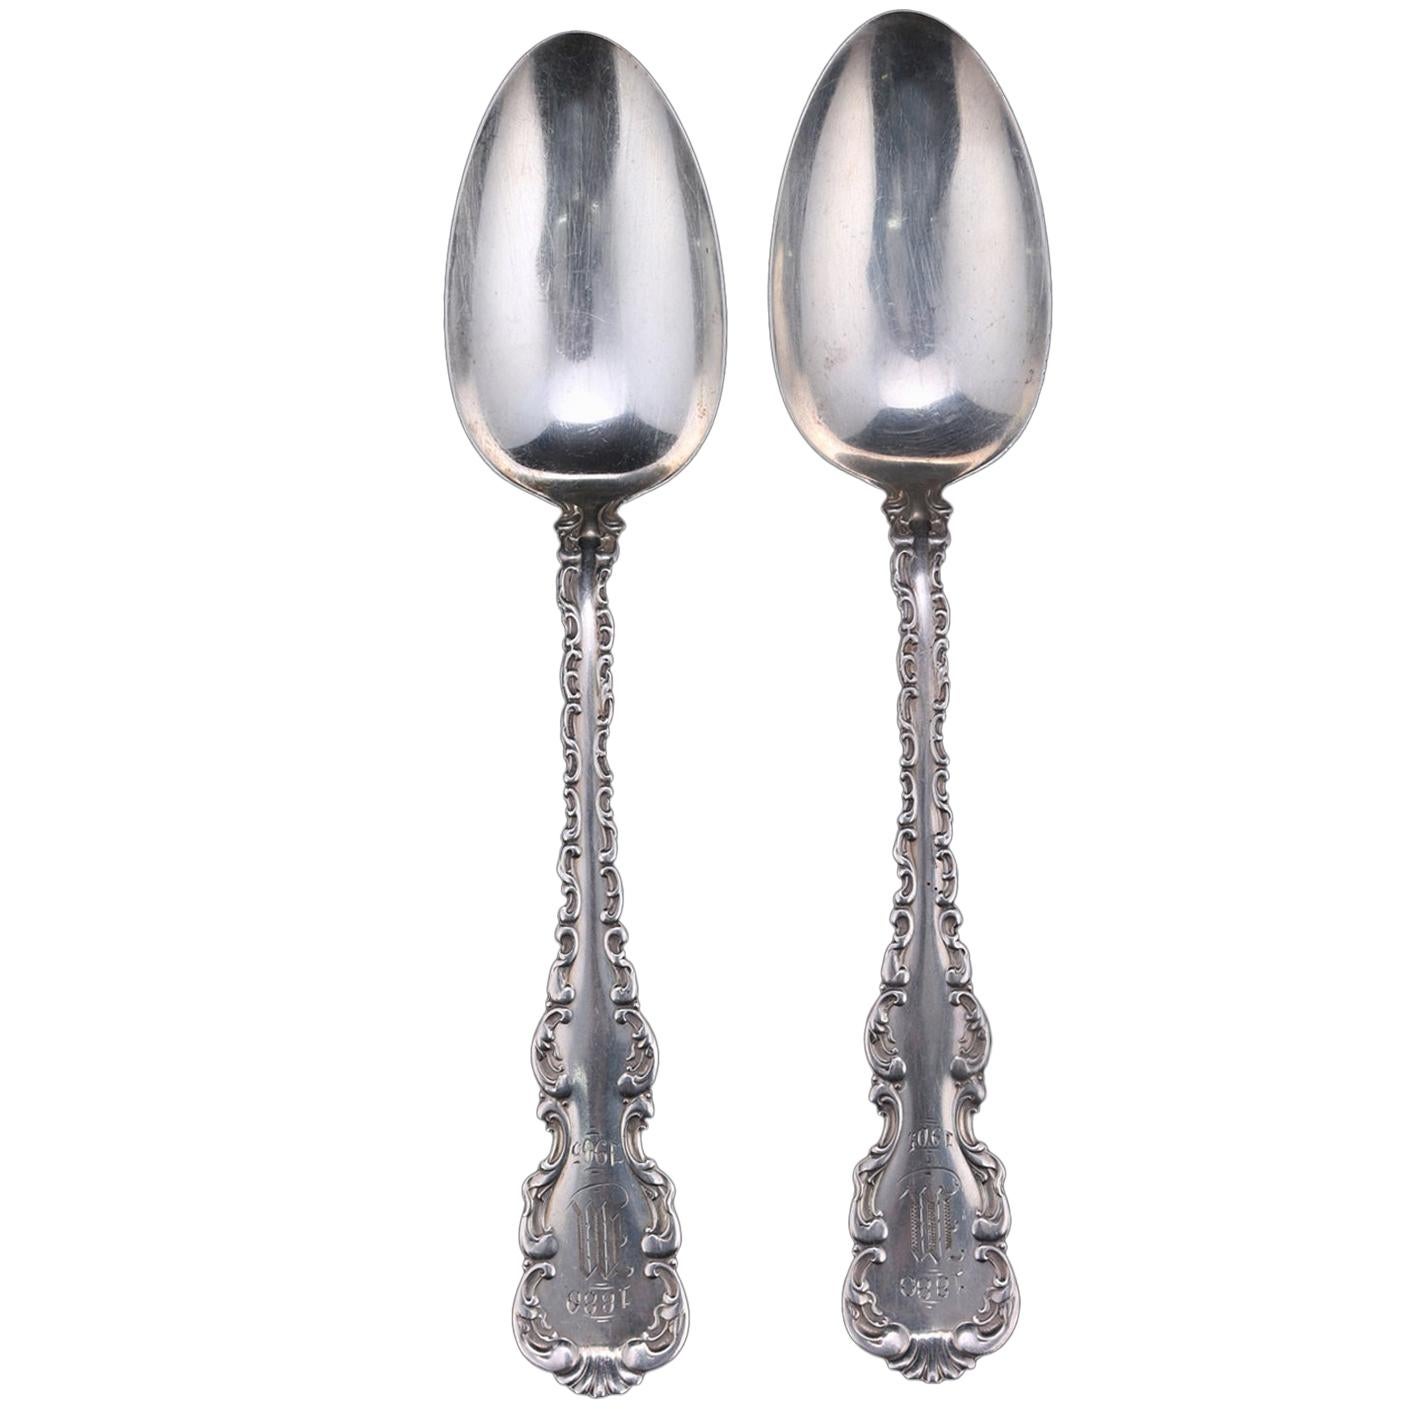 Pair of Whiting Sterling Silver Tablespoons, circa 1905